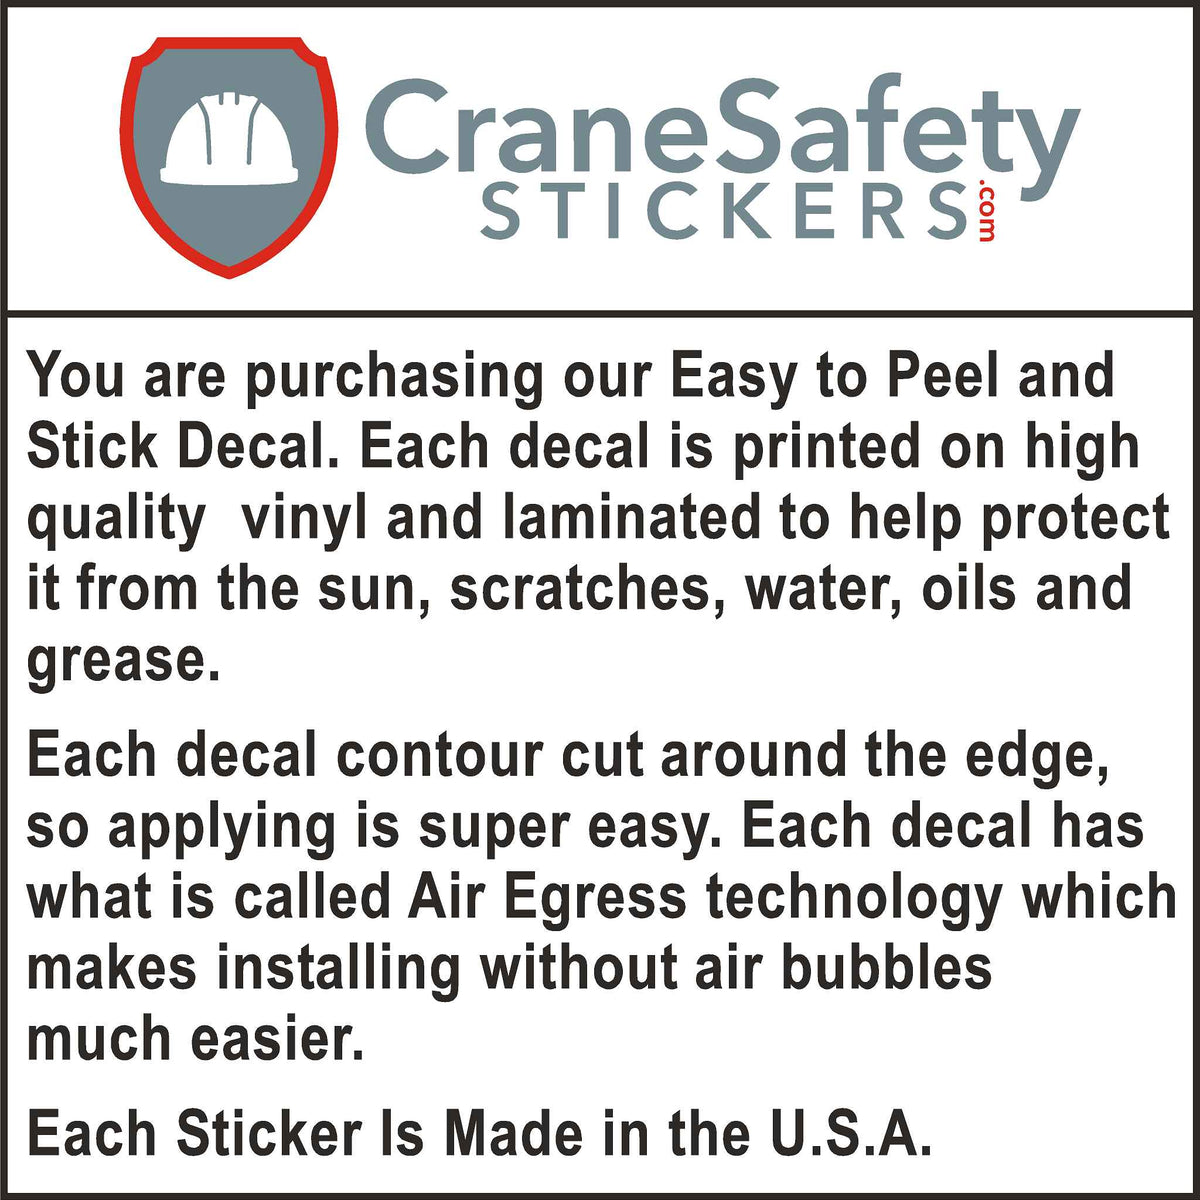 The Quality of our Our non-continuous rotation safety sticker.